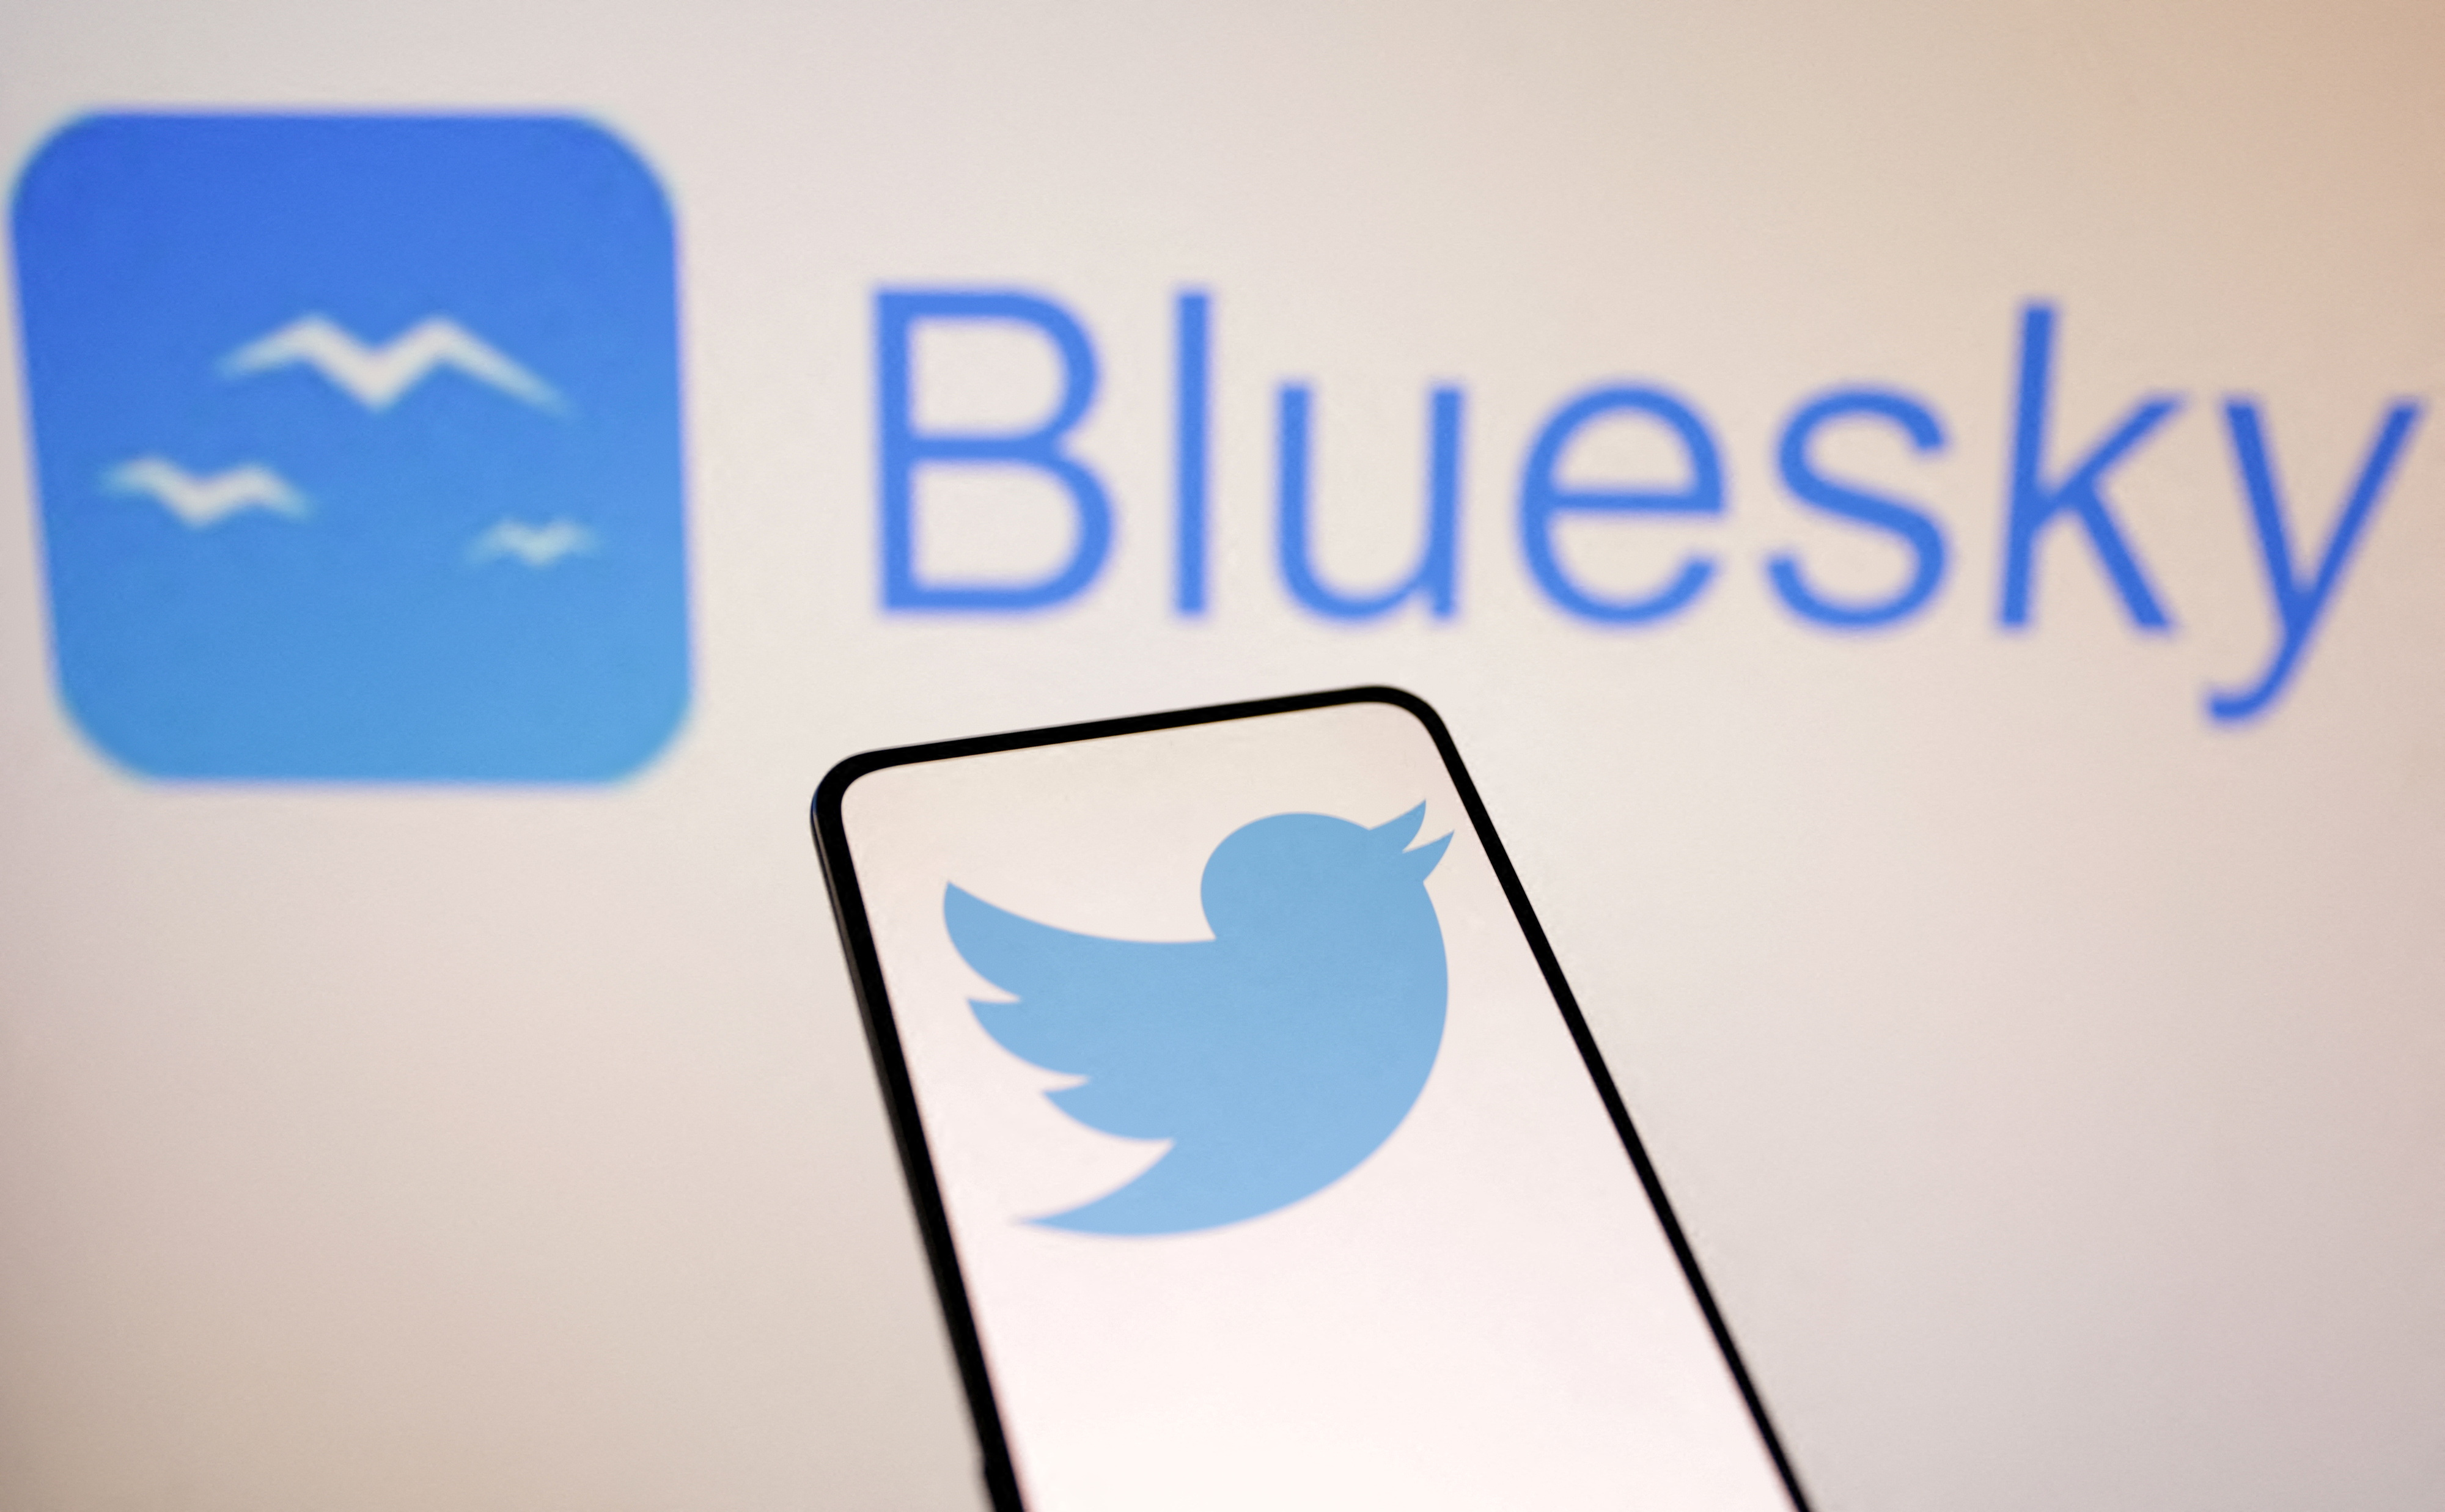 Twitter and Bluesky logos are seen in this illustration taken November 7, 2022. REUTERS/Dado Ruvic/Illustration